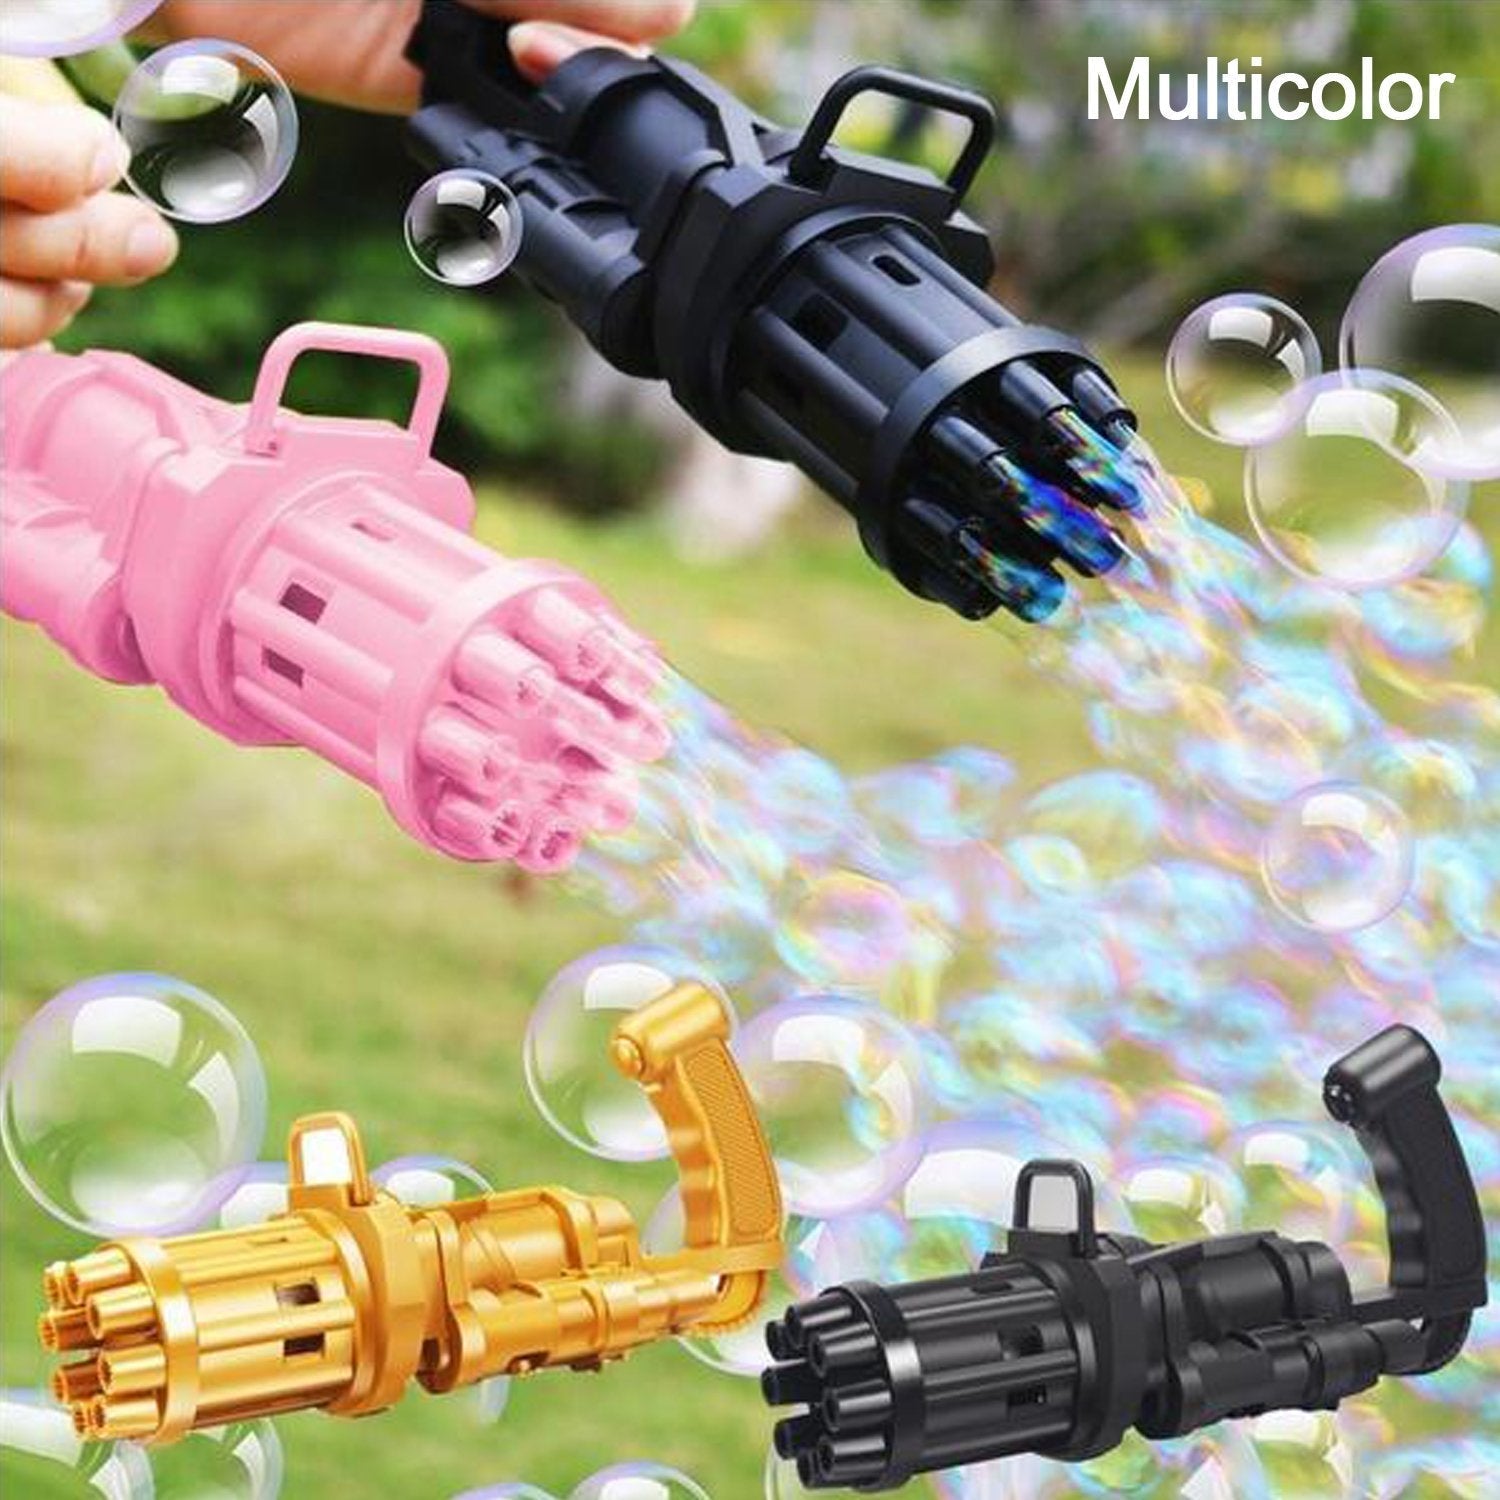 8028A Gatling Bubble Gun and launcher Used for making and producing bubbles, especially for kids.